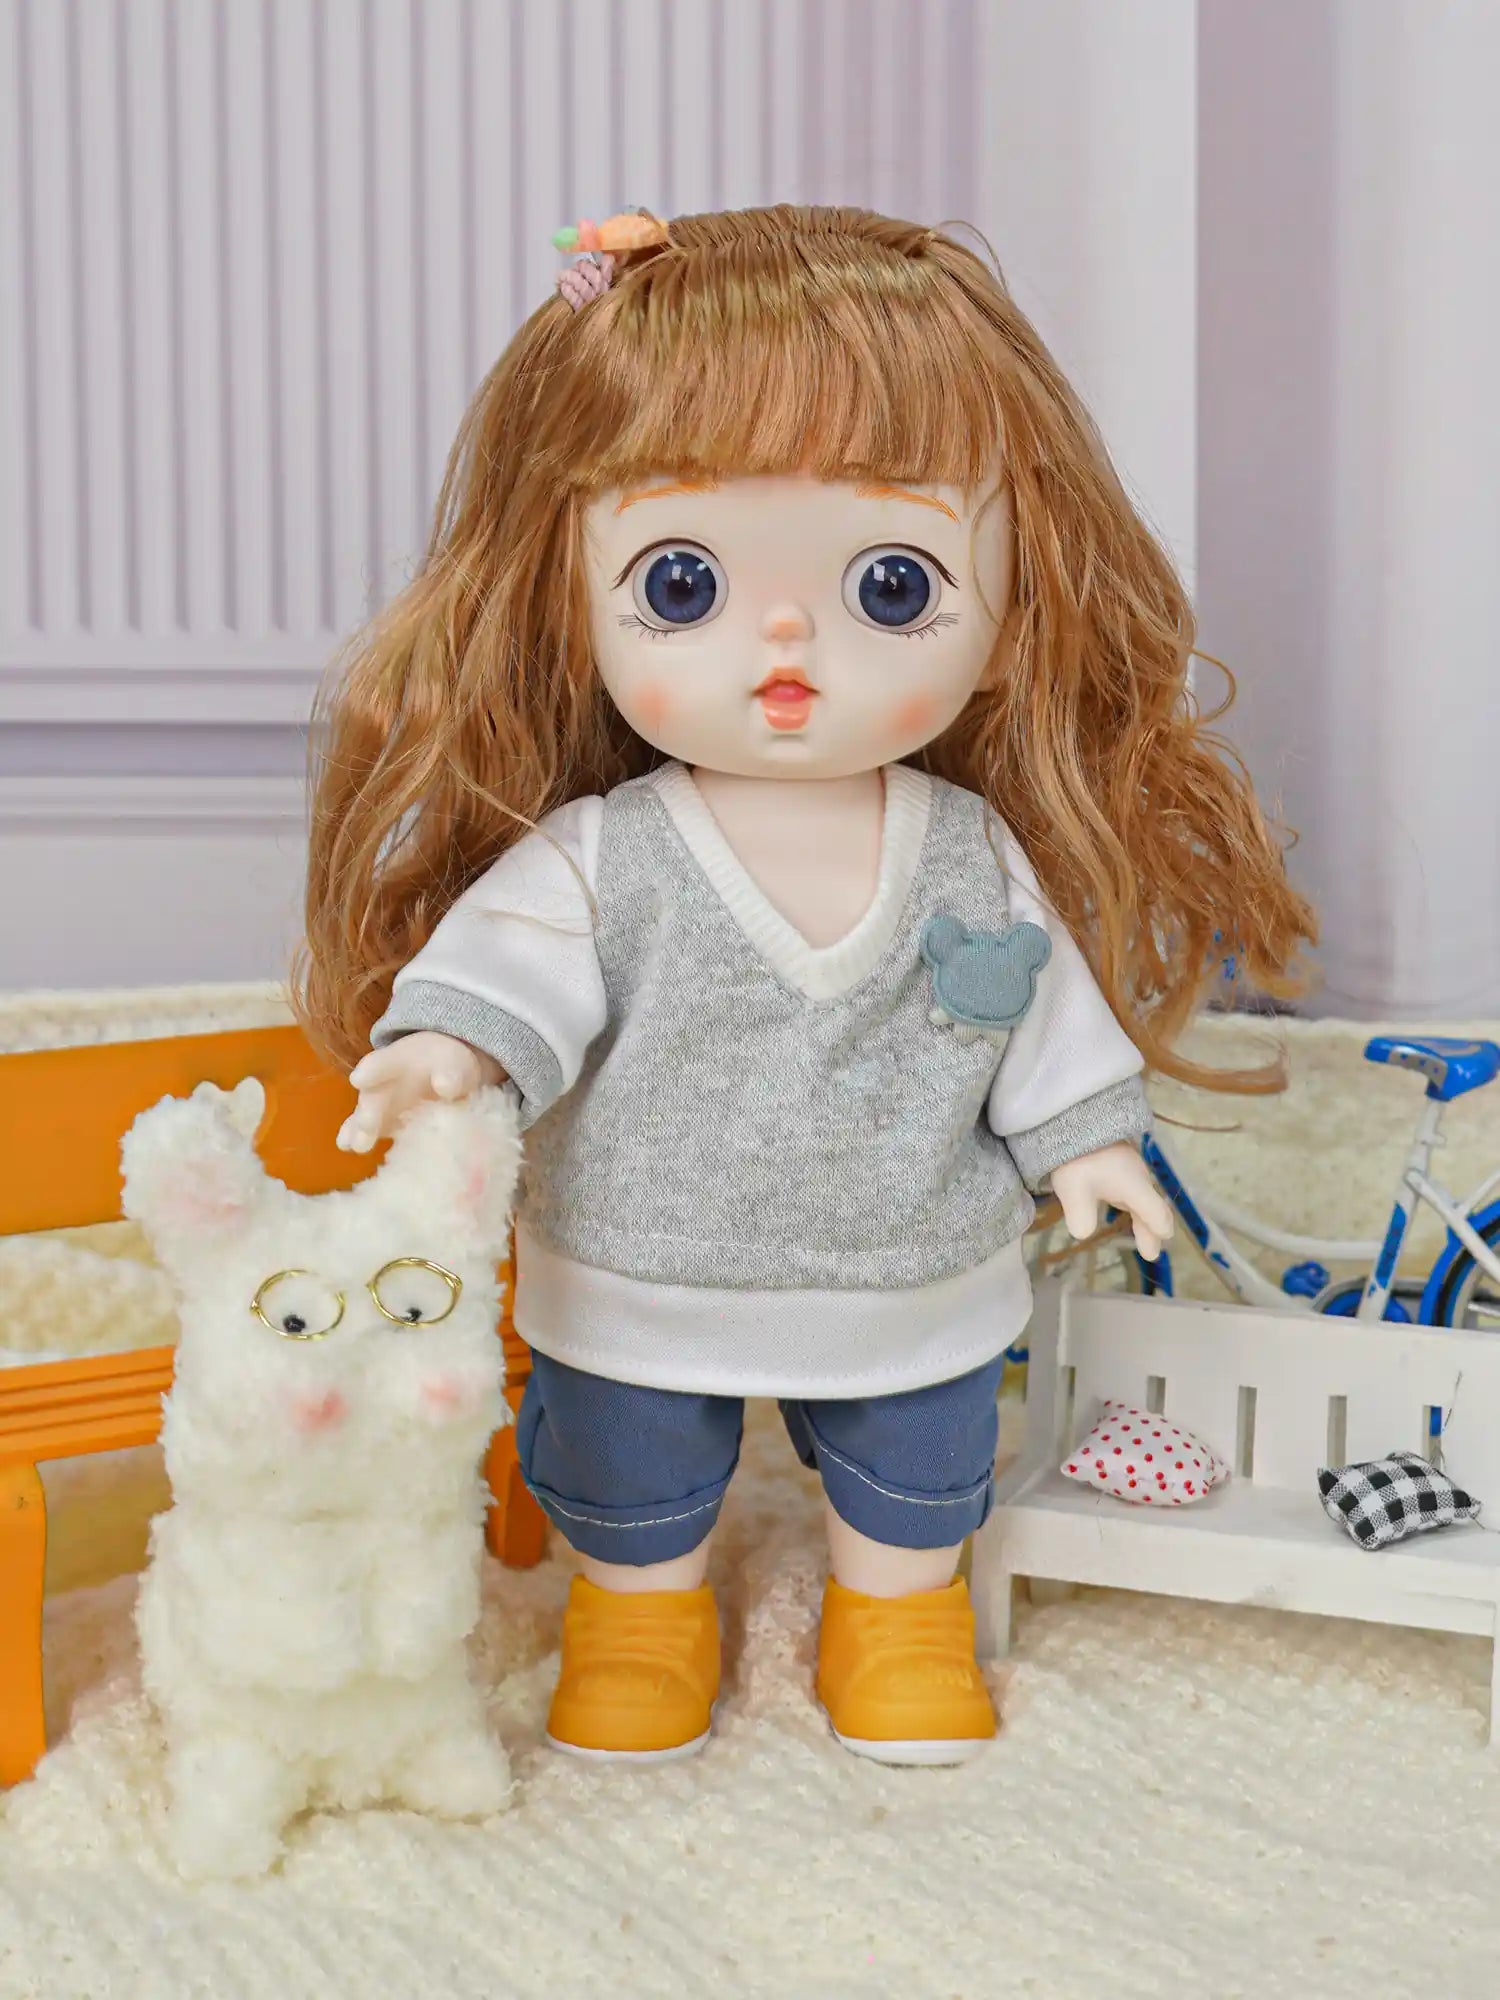 A doll with brown wavy hair and blue eyes, dressed in a gray sweater and blue jeans, stands next to a fluffy white toy dog with glasses.